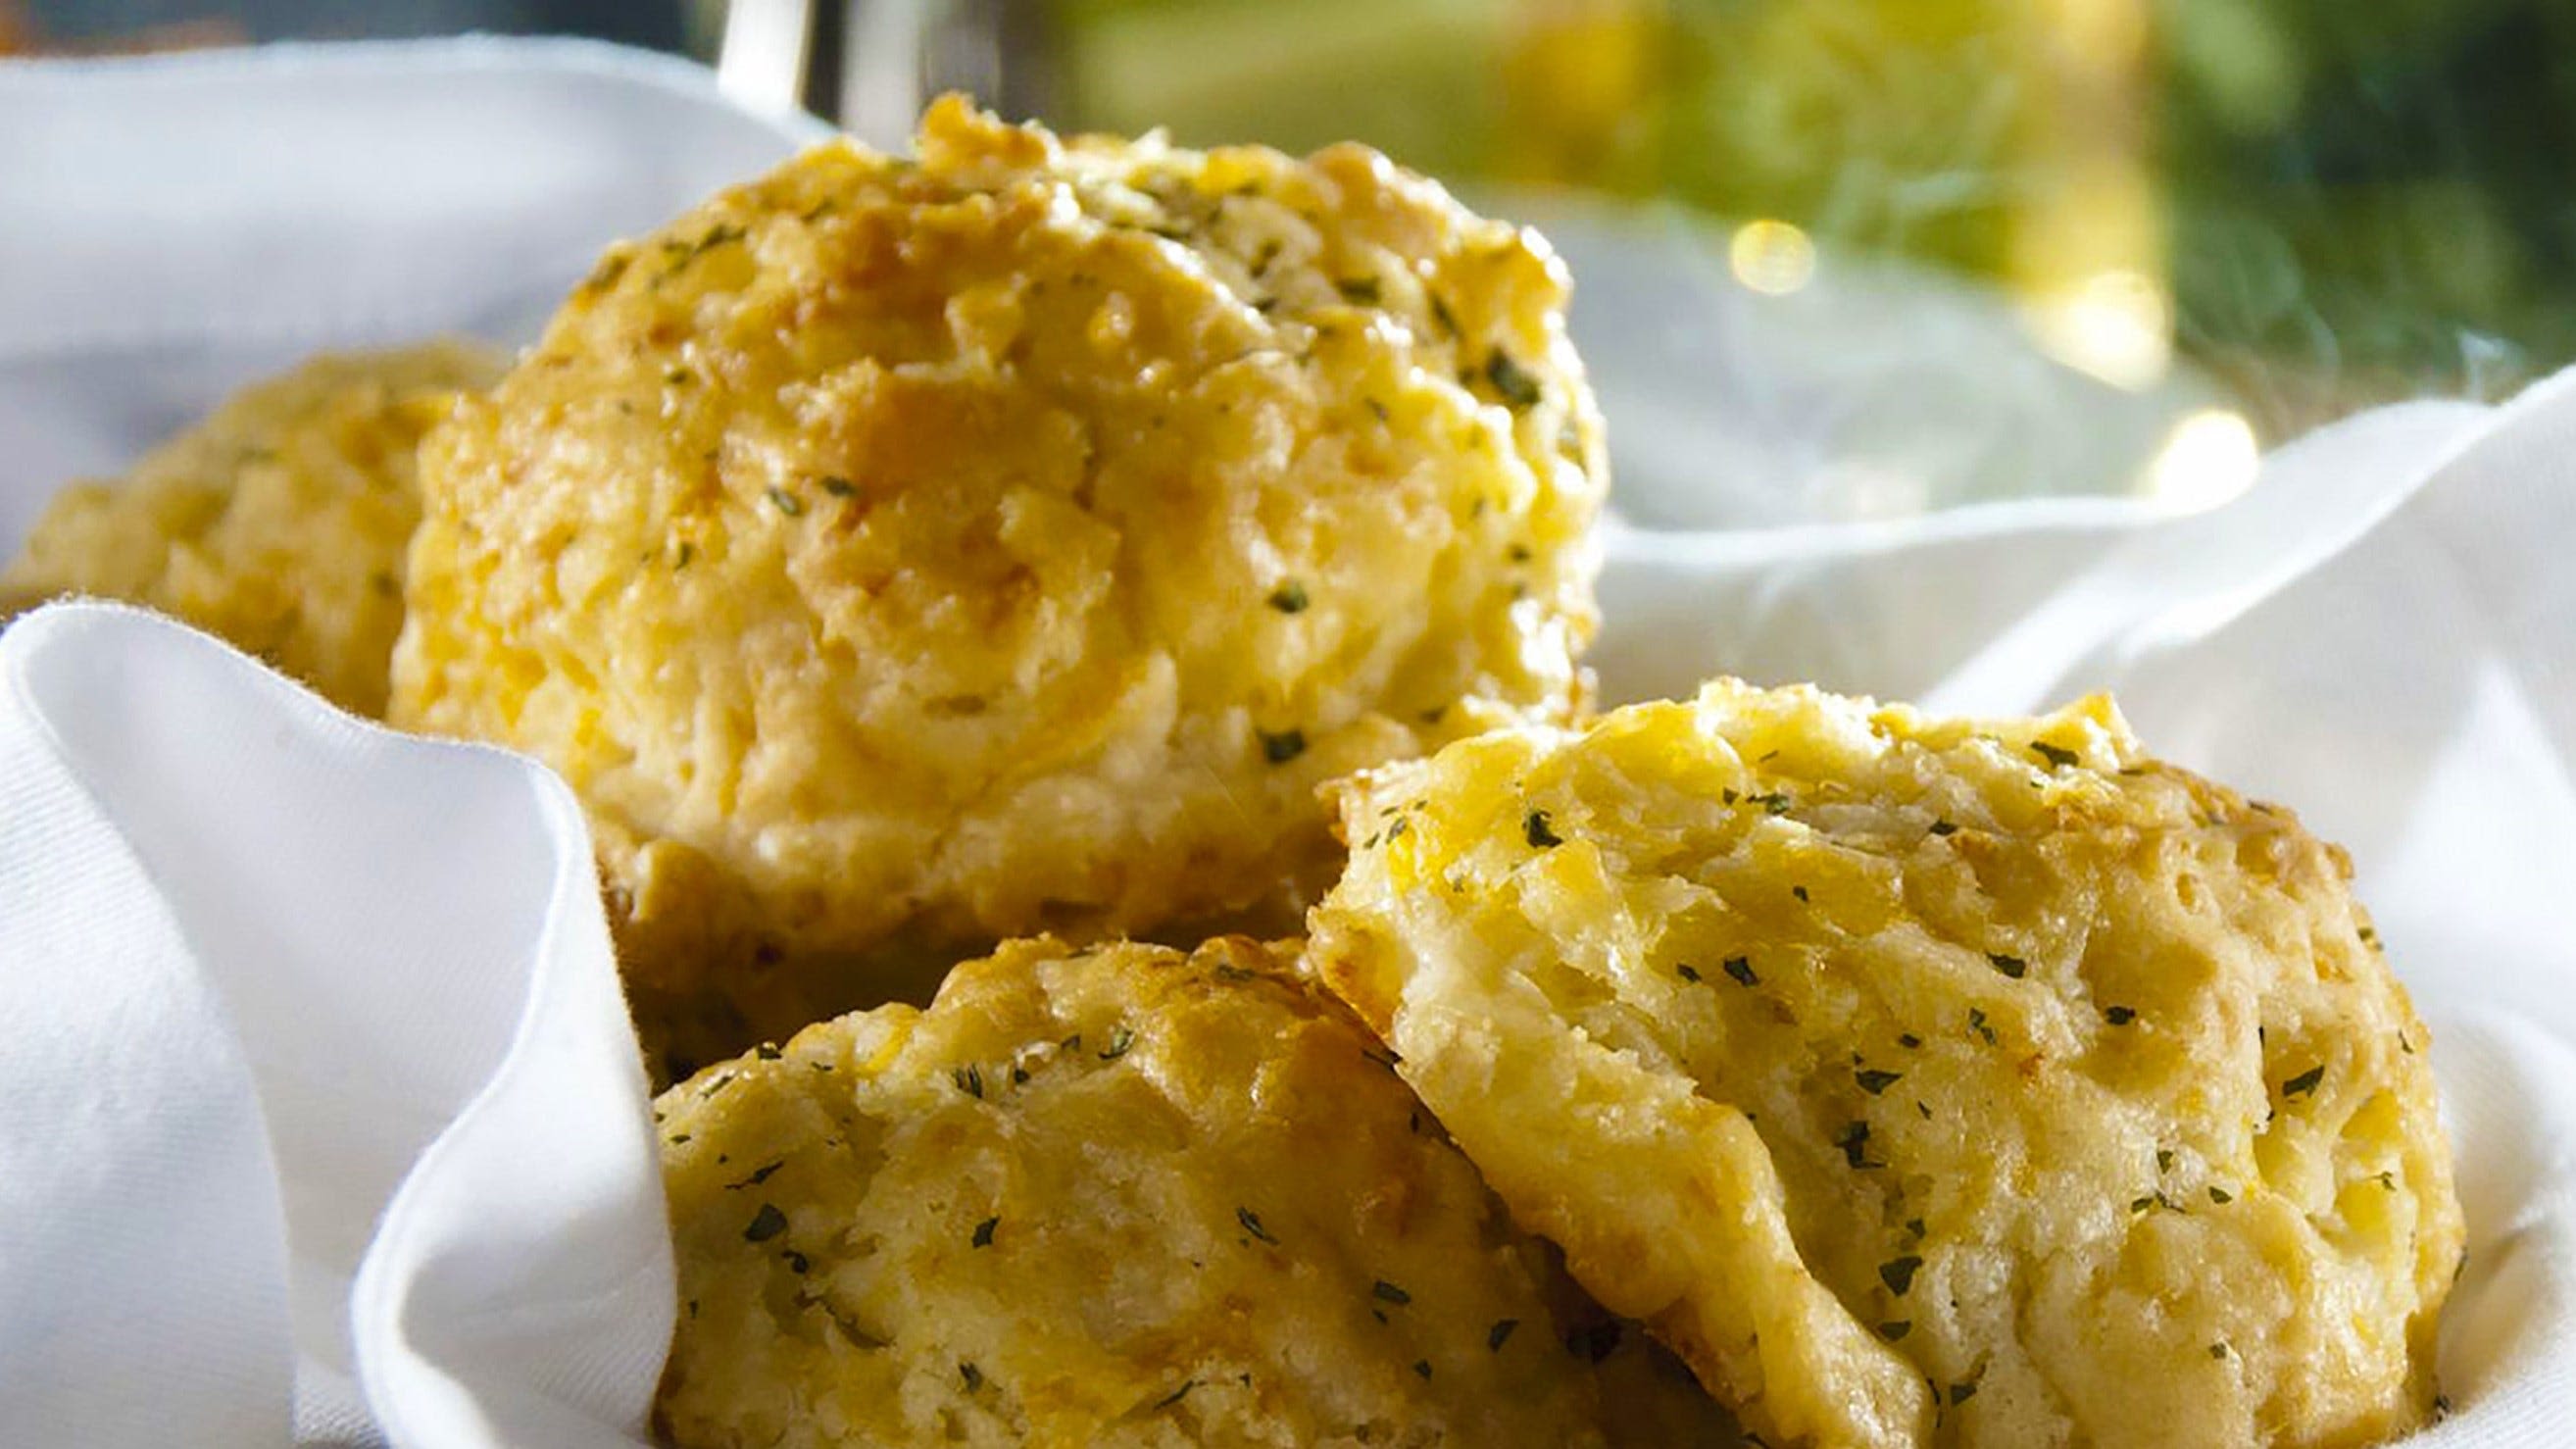 You can still eat Cheddar Bay Biscuits despite Red Lobster closures. Try these DIY recipes